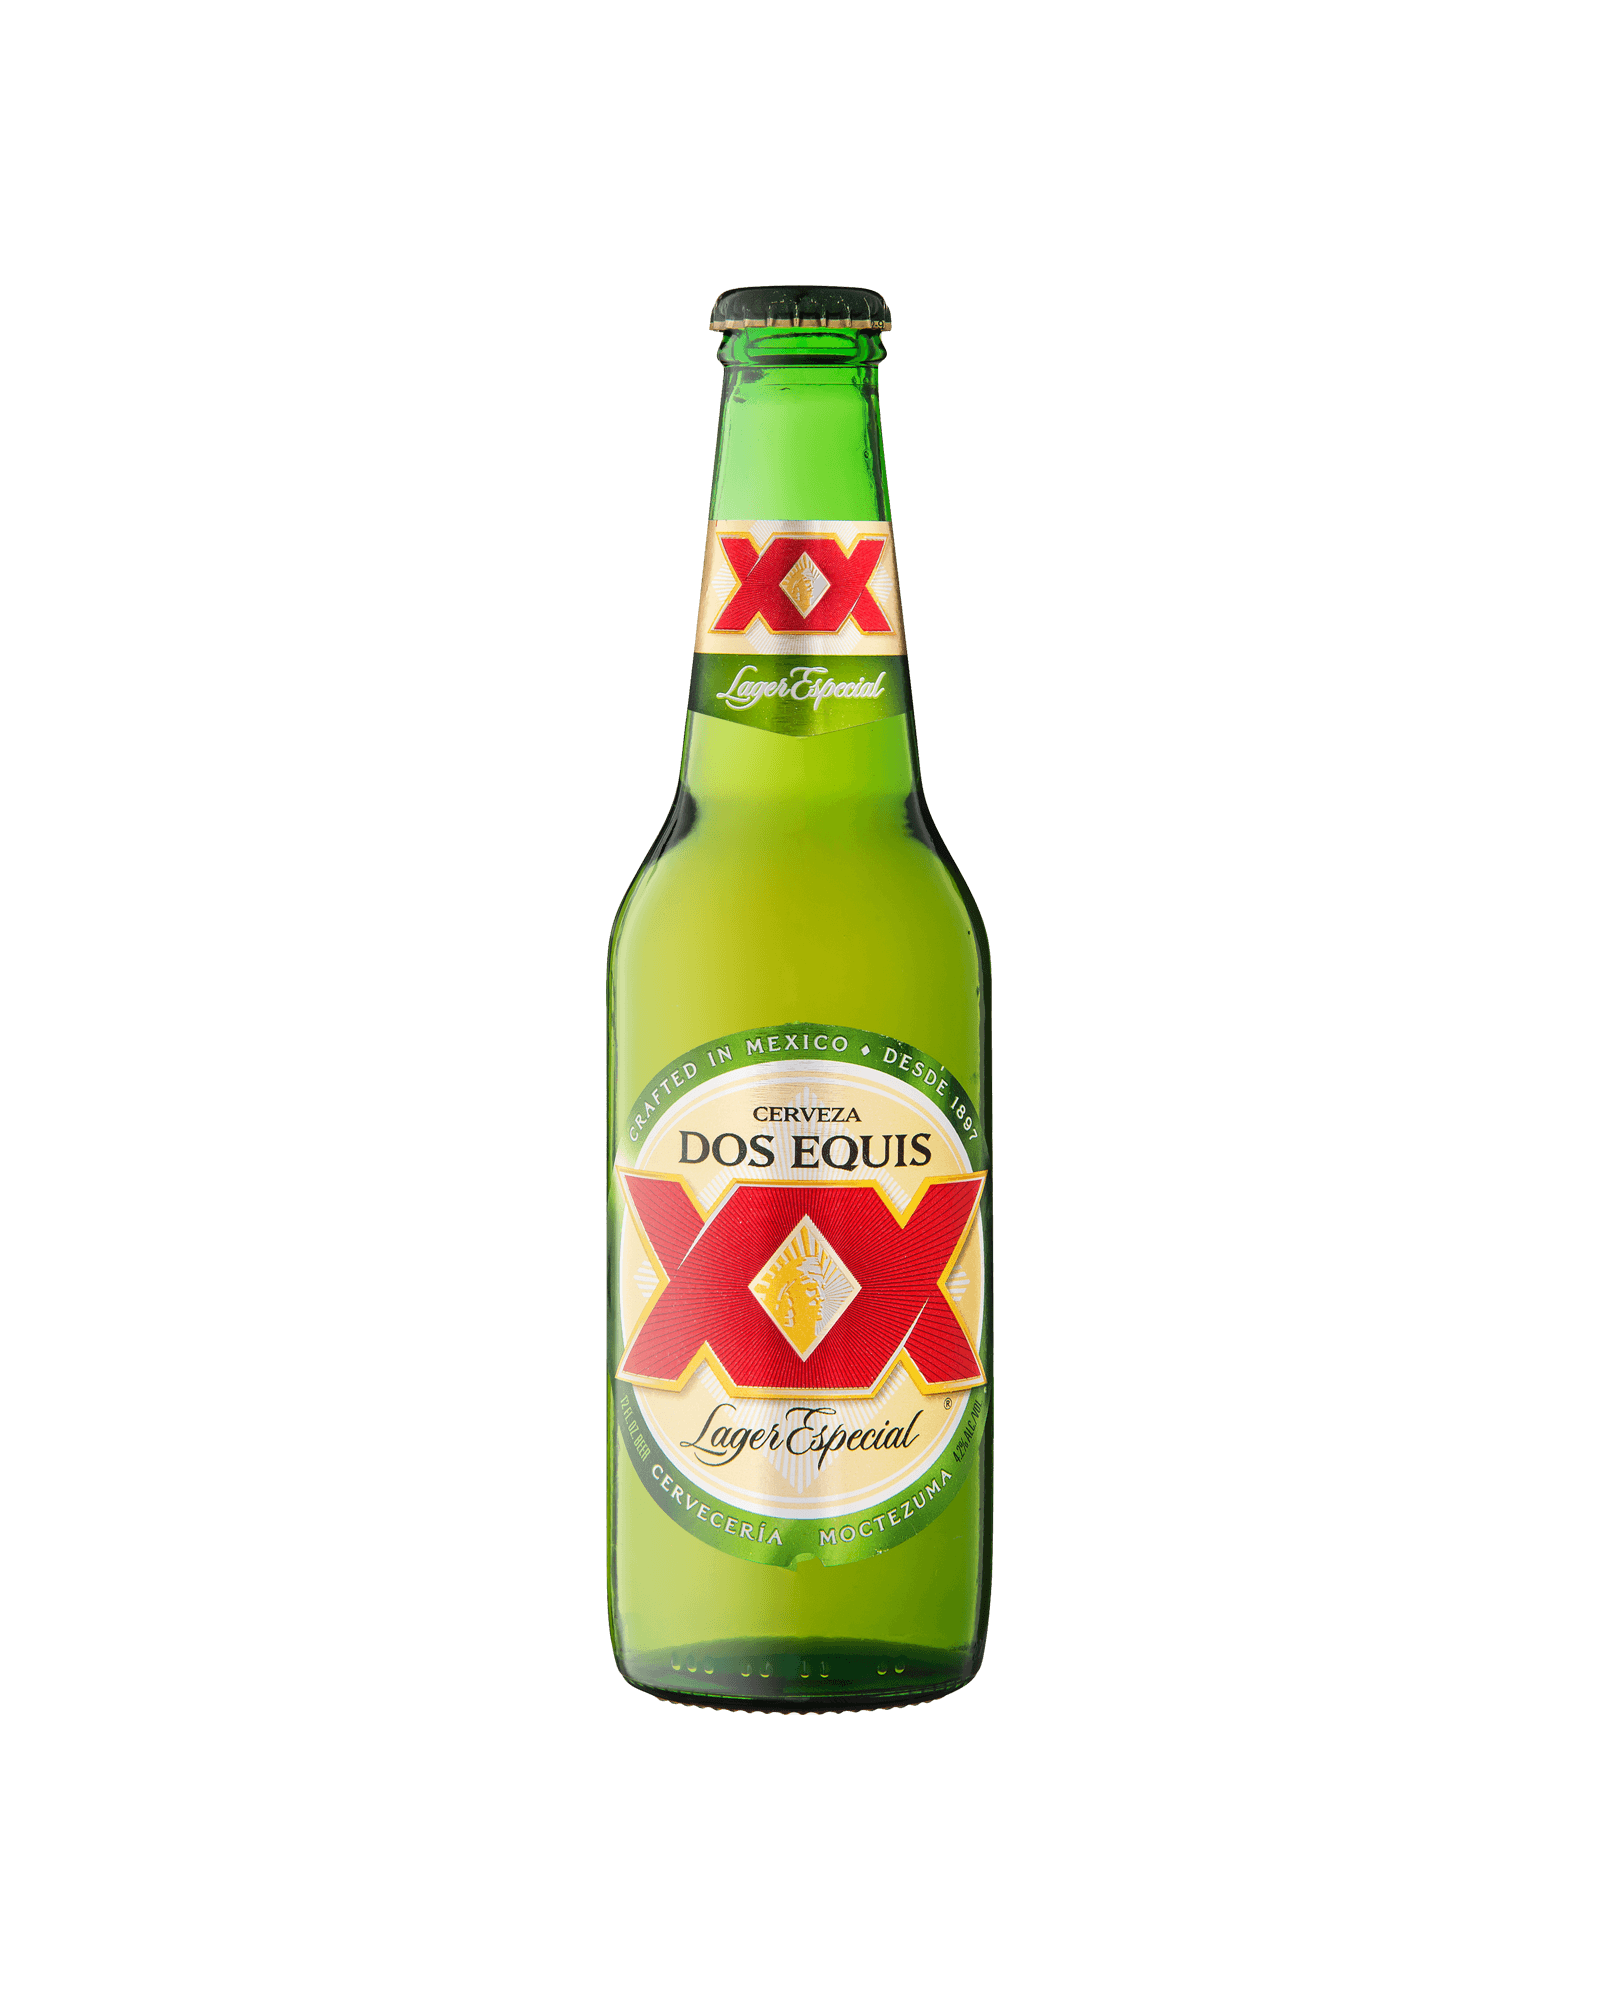 Dos Equis Lager Especial Logo - Dos Equis Lager Especial 355mL | Dan Murphy's | Buy Wine, Champagne ...